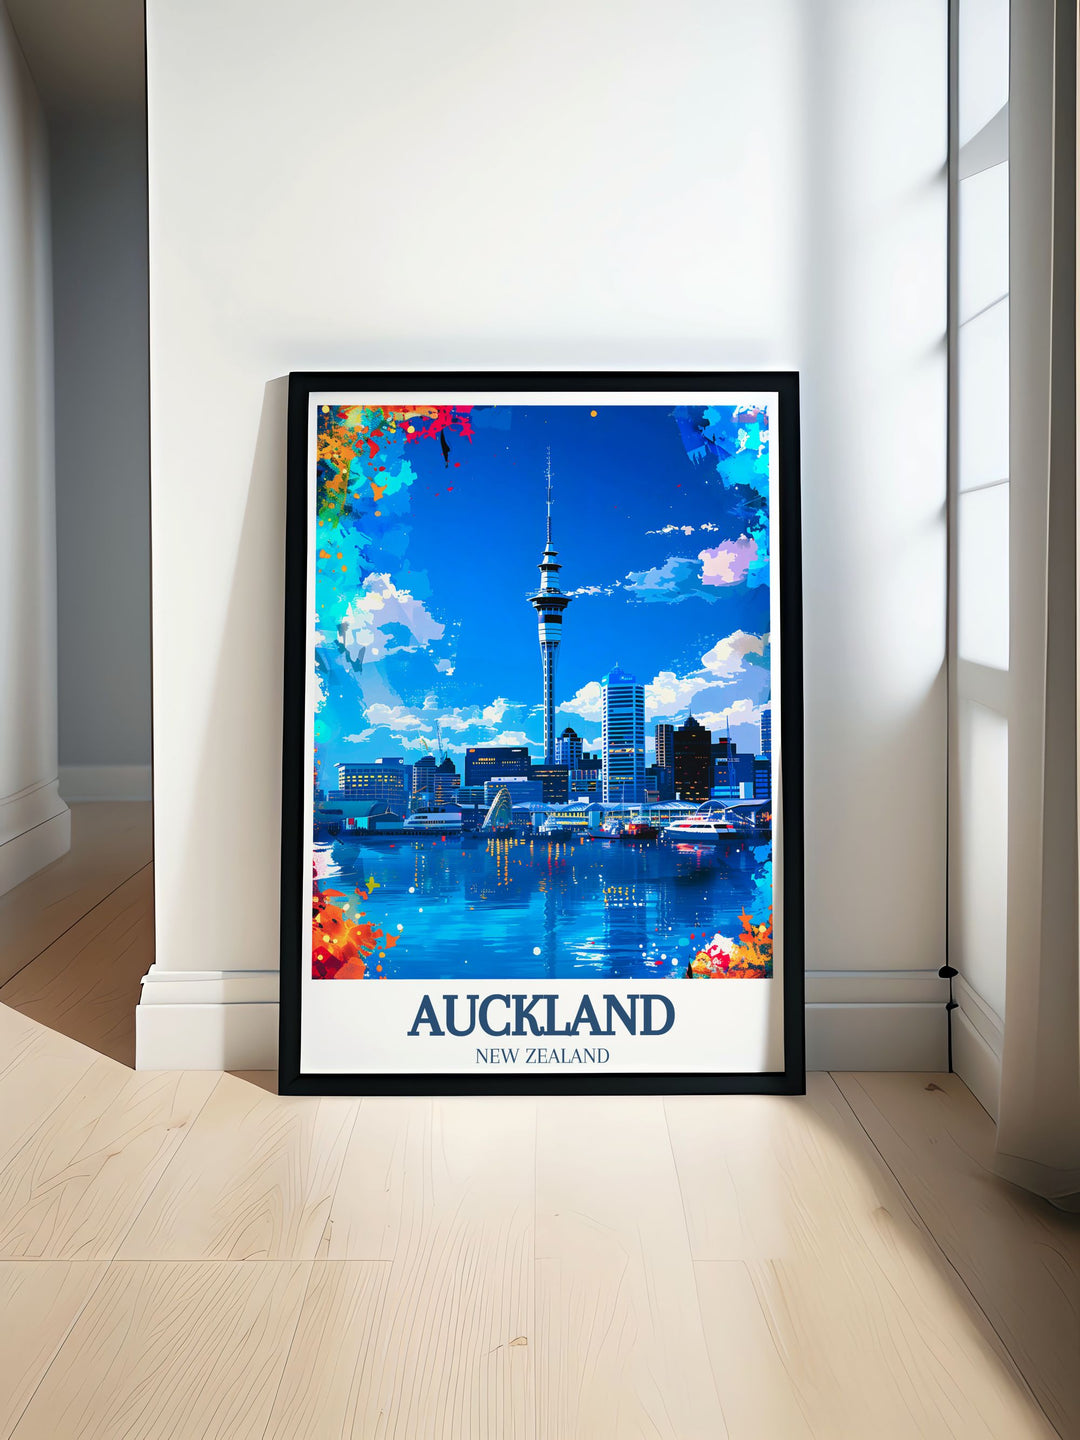 Stunning Auckland poster featuring the iconic Sky Tower and city skyline, capturing the vibrant energy and urban charm of New Zealands largest city. Perfect for those who love travel art and want to bring a piece of Aucklands beauty into their home decor.